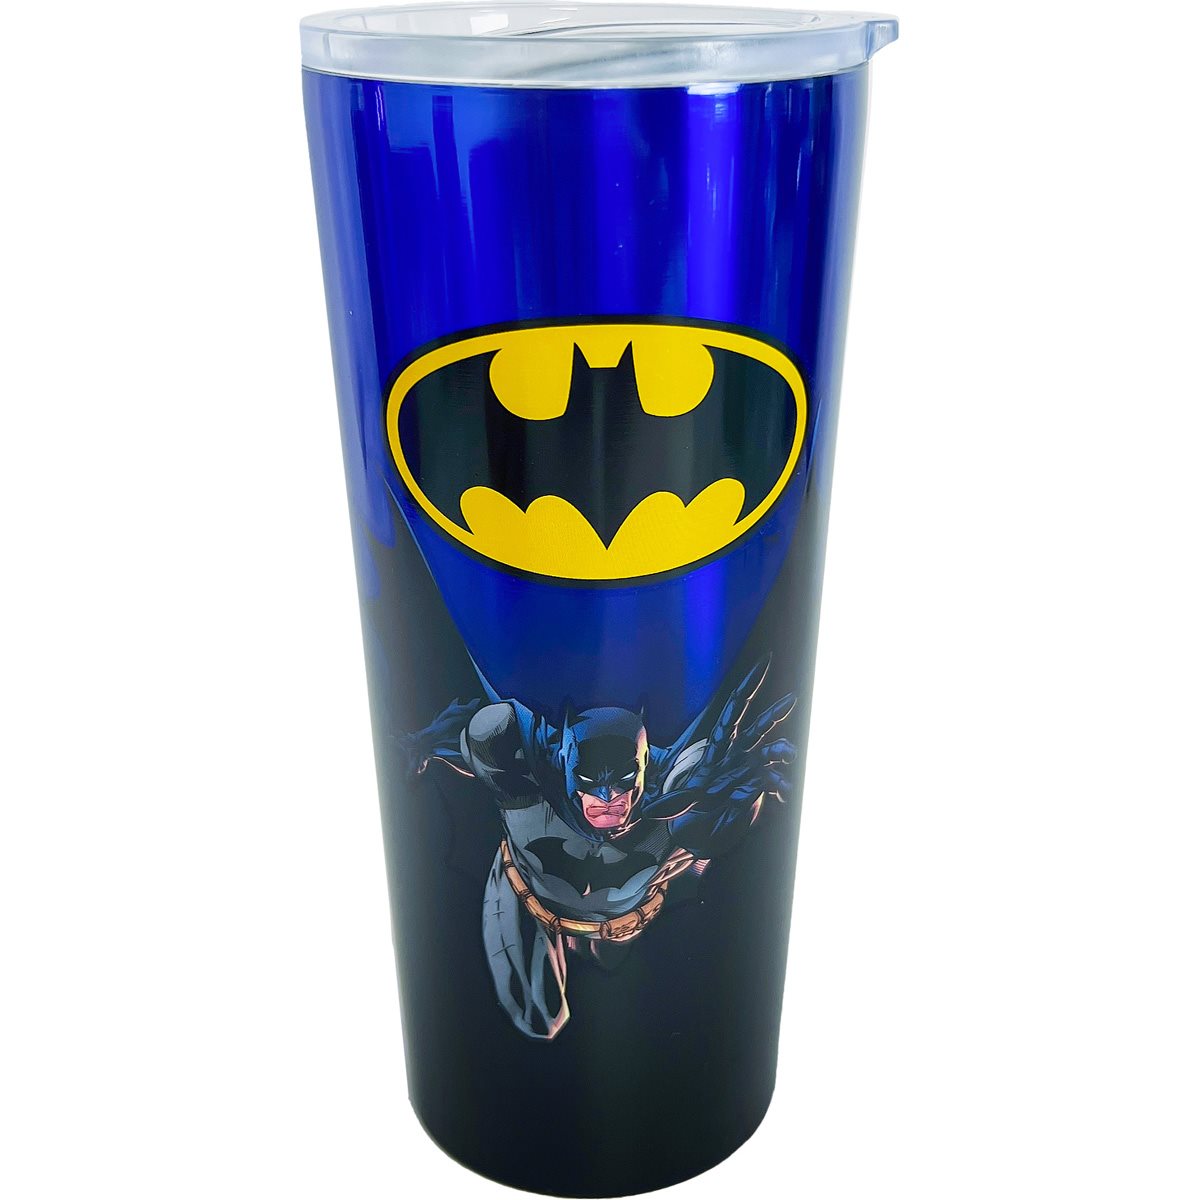 Batman 22 oz. Stainless Steel Travel Cup - Entertainment Earth